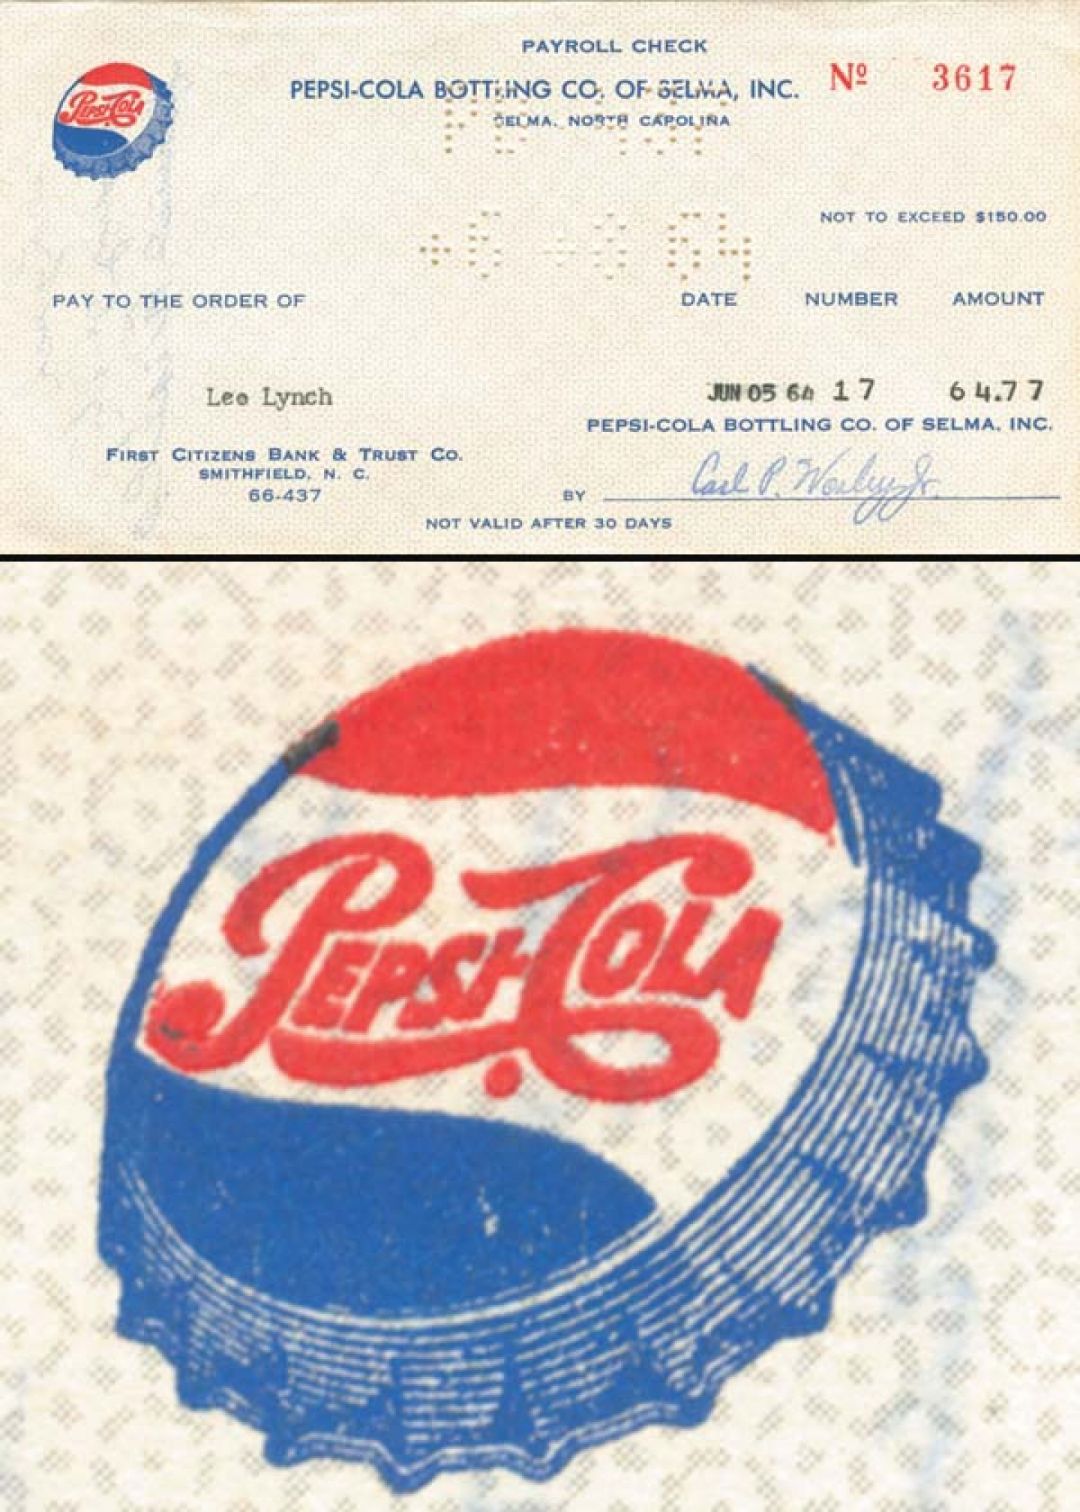 Pepsi-Cola Bottling Co. of Selma, Inc. - 1960's dated Famous Soda North Carolina Check - Measures 3 5/16" Tall by 6 1/2" Wide